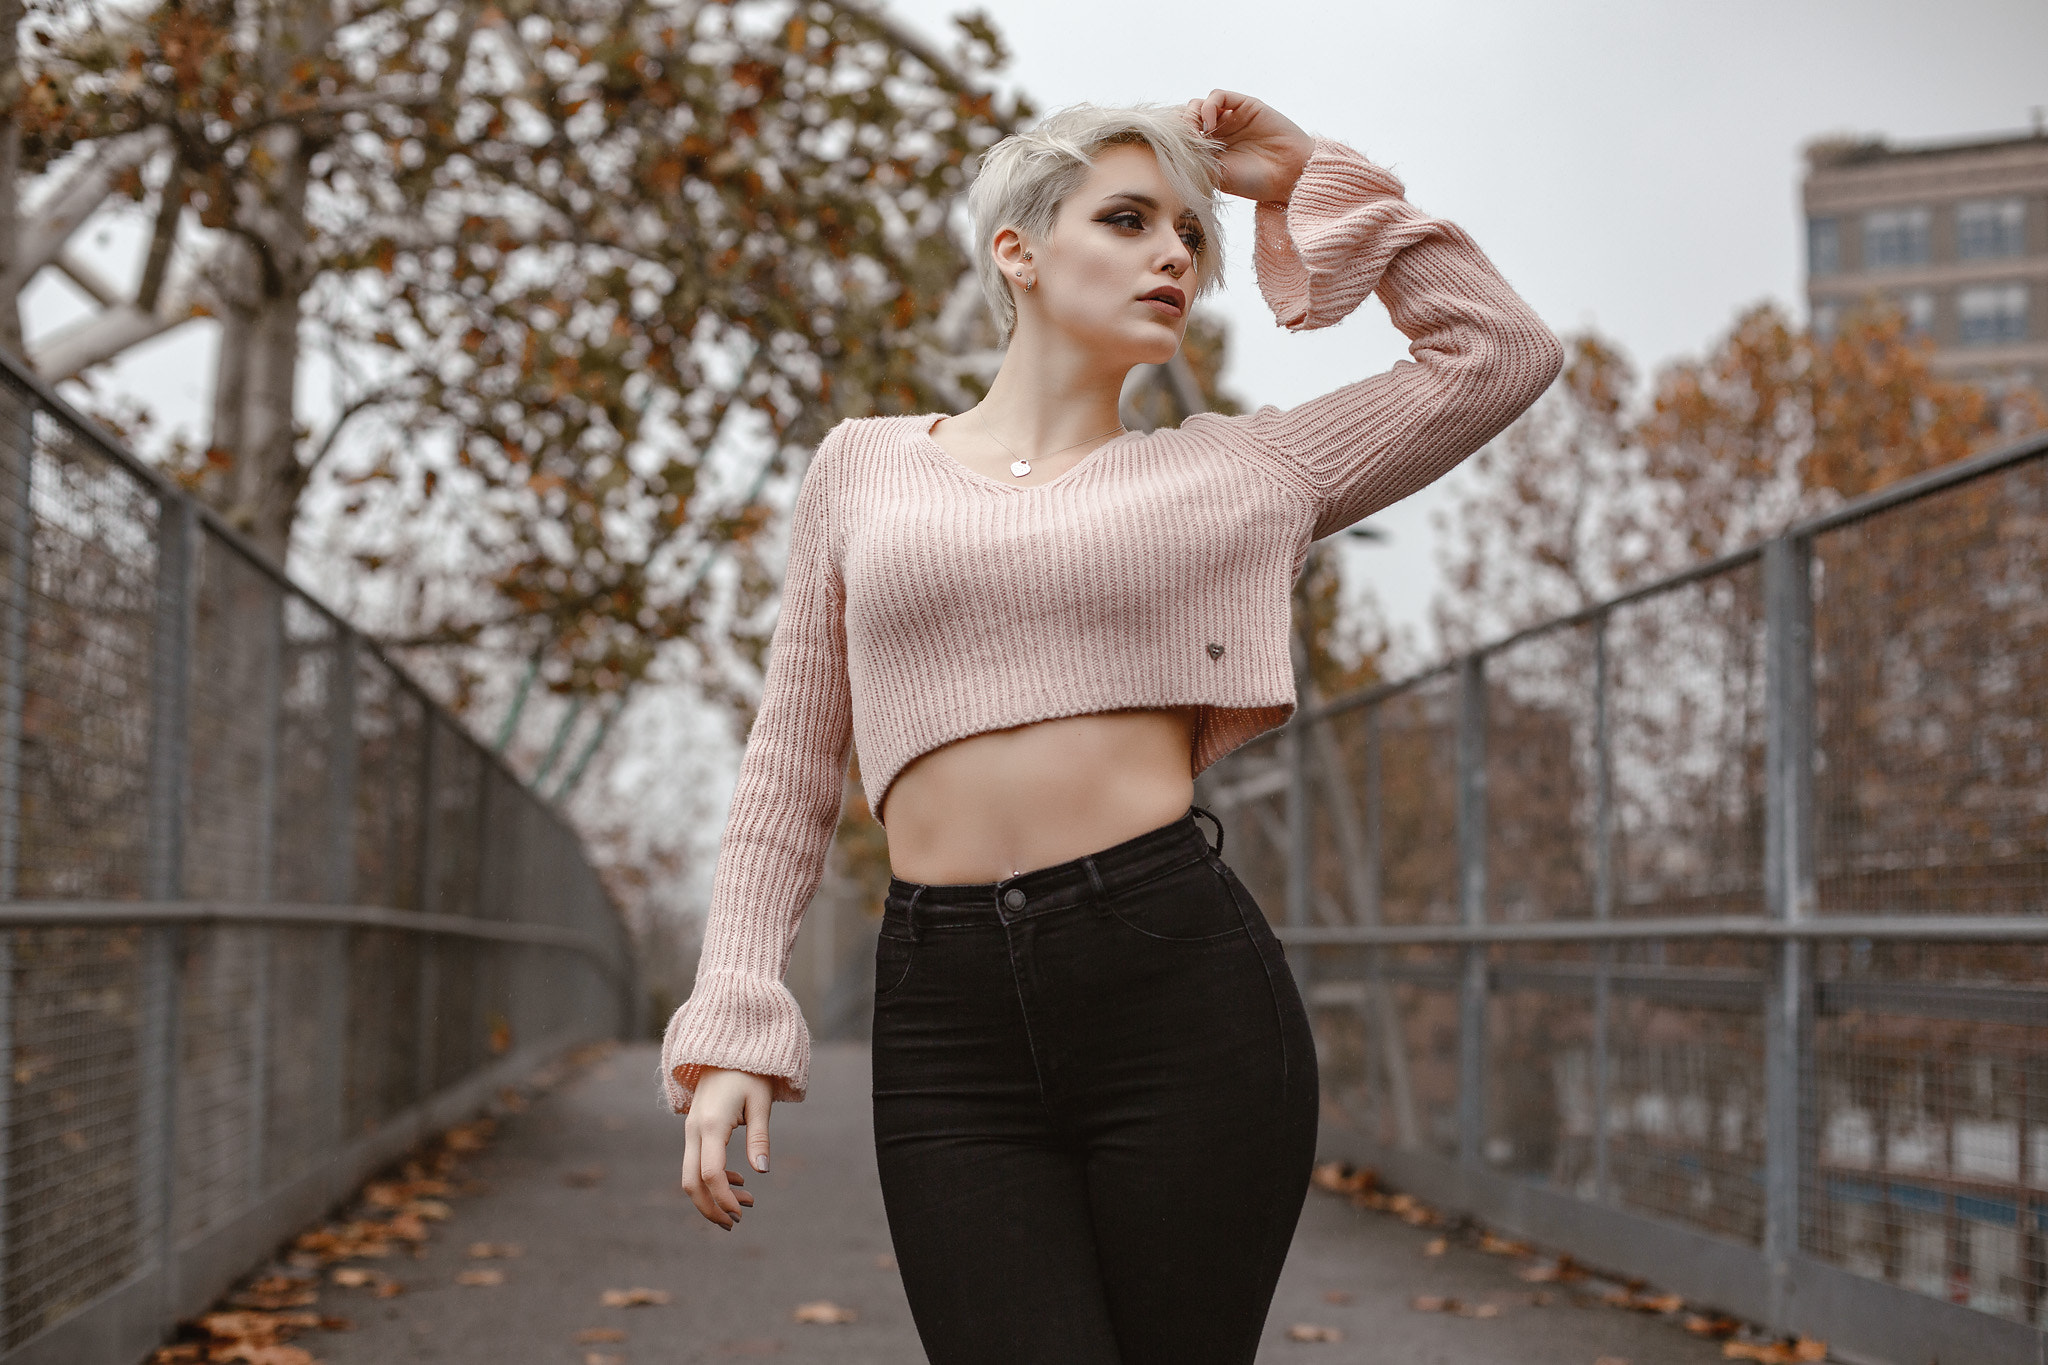 Women Outdoors Portrait Jeans High Waisted Necklace Short Hair White Hair Looking Away Bokeh Standin 2048x1365